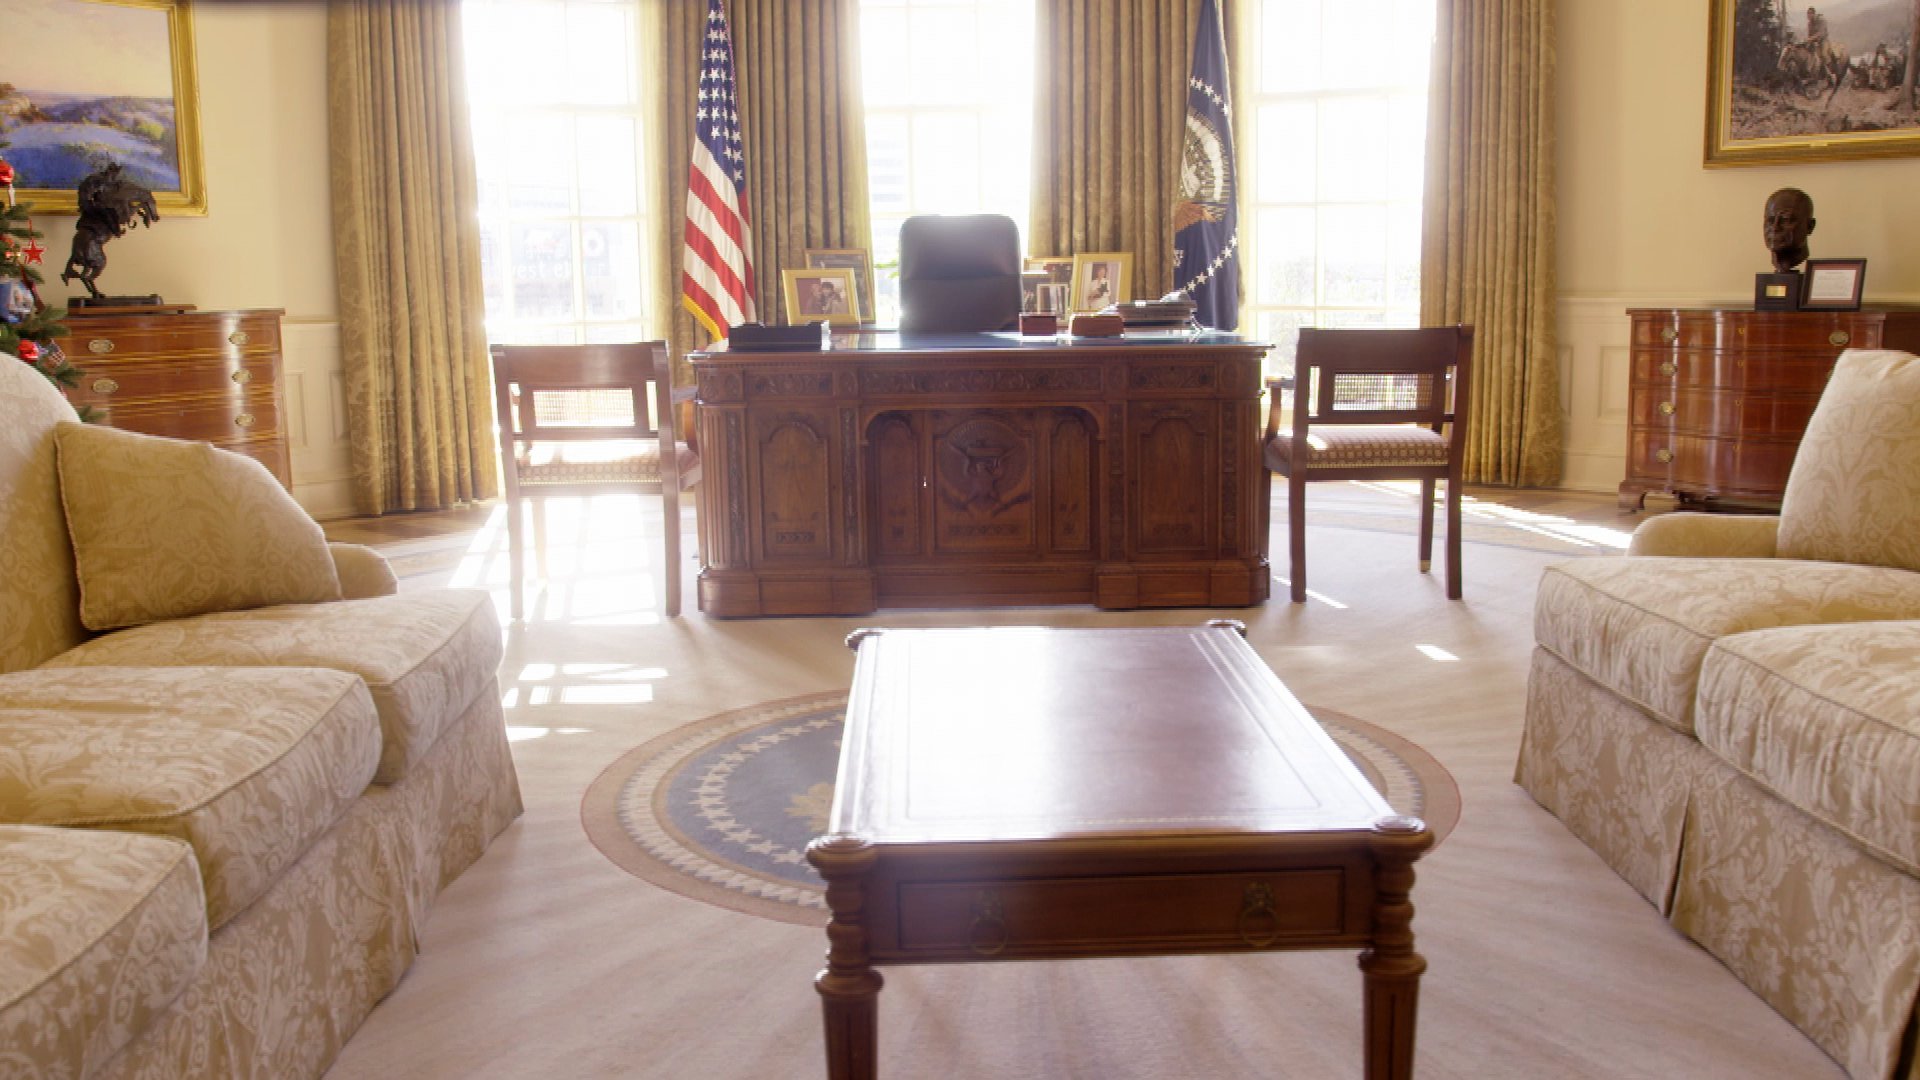 The White House: Inside Story | The Oval Office | PBS LearningMedia